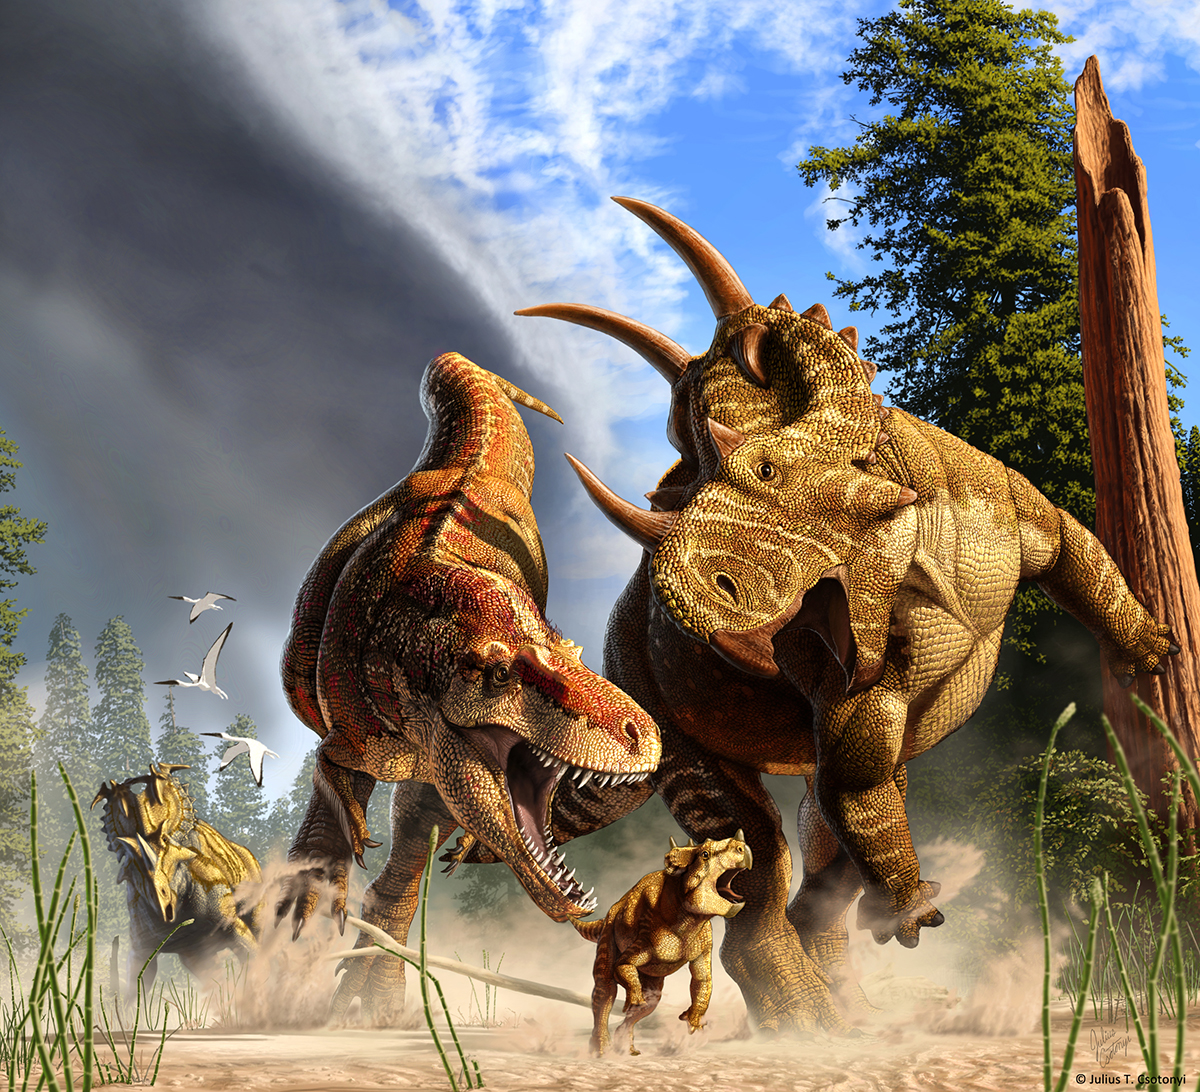 In this artist’s depiction of wildlife from Alberta, Canada, 77 million years ago, the tyrannosaur <i>Daspletosaurus</i> is hunting a young horned <i>Spinops</i>, while an adult <i>Spinops</i> tries to interfere and a different horned dinosaur (Coronosaurus) watches from a distance. Illustration by Julius Csotonyi.